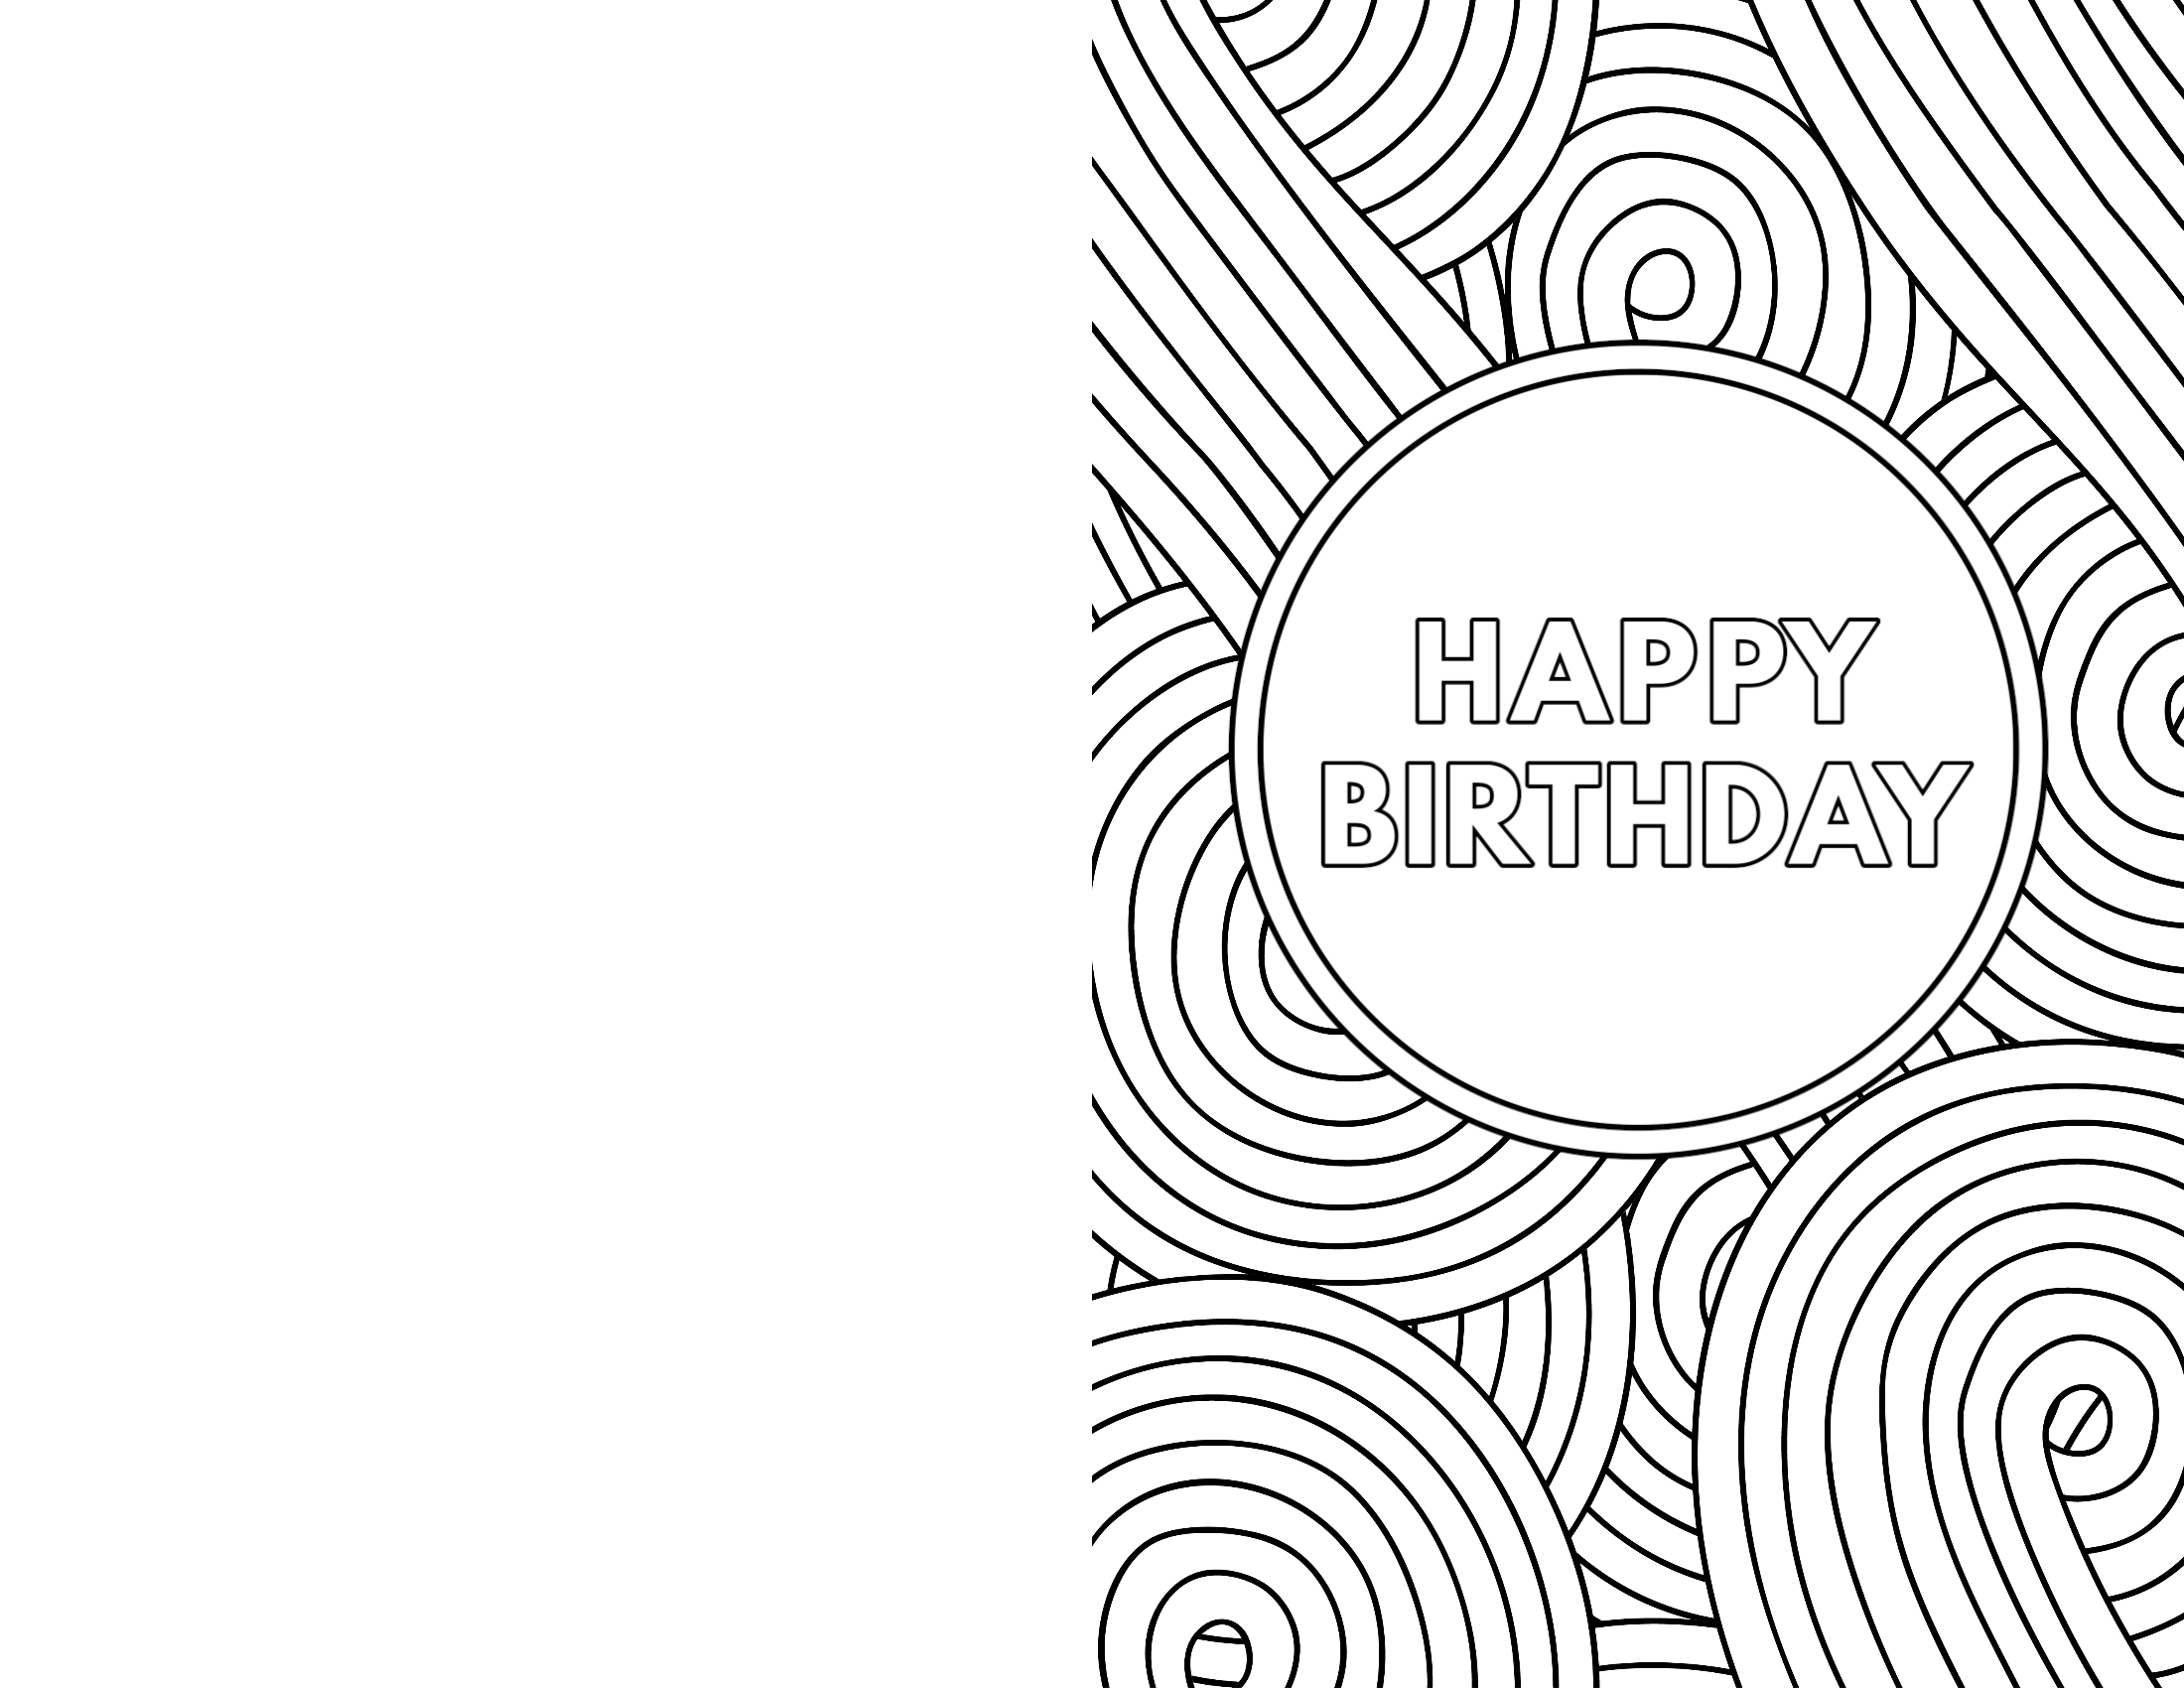 secure free downloadable birthday card templates